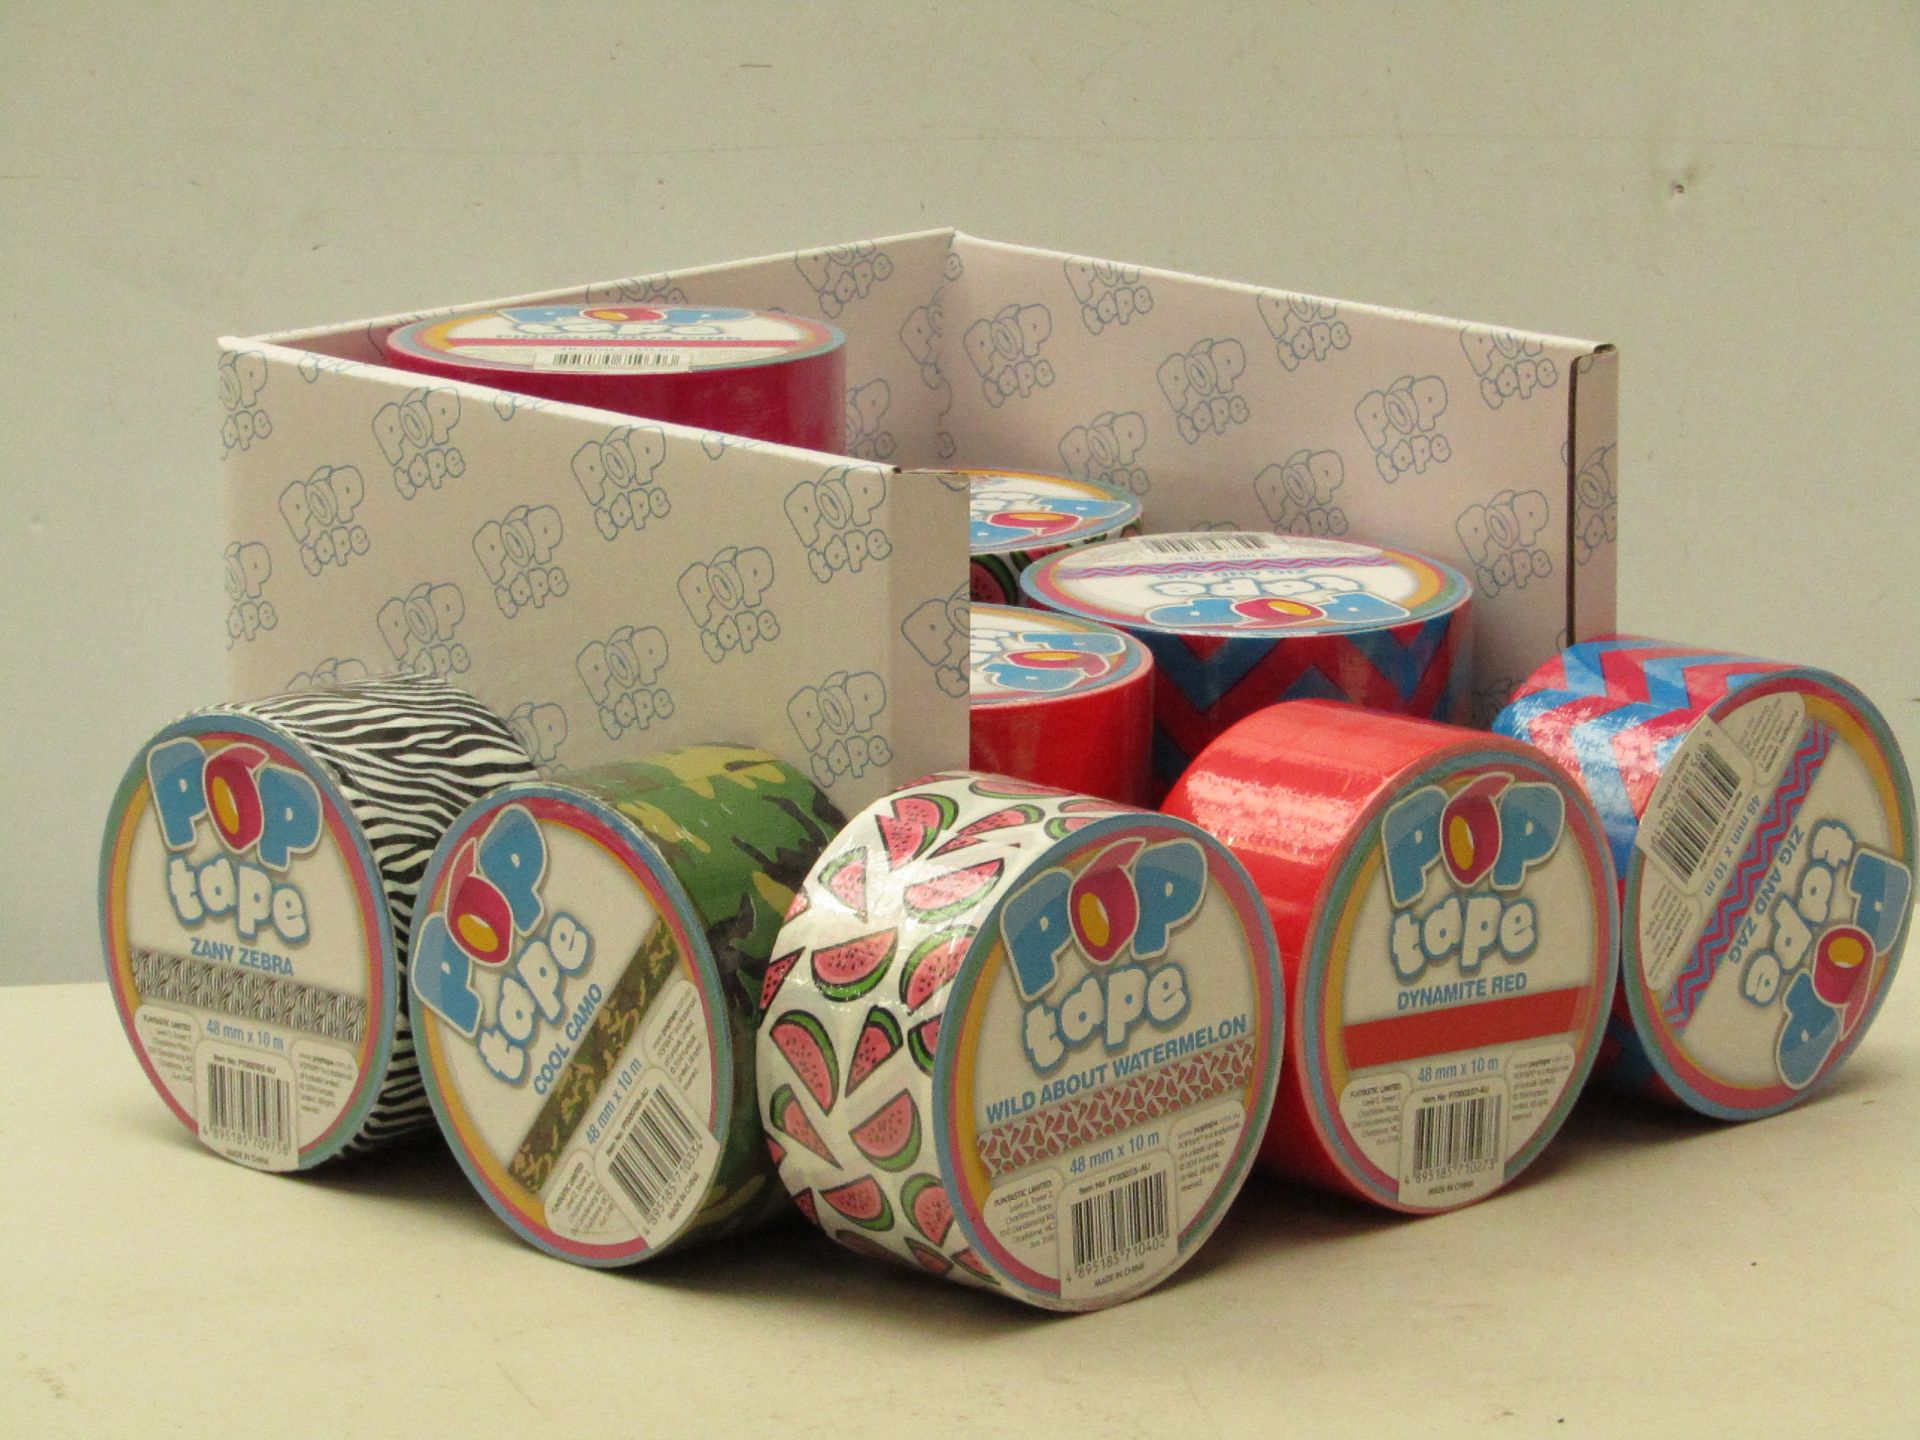 12 x various rolls of Pop Tape, 48mm x 10m per tape (see image for designs) new & packaged. The